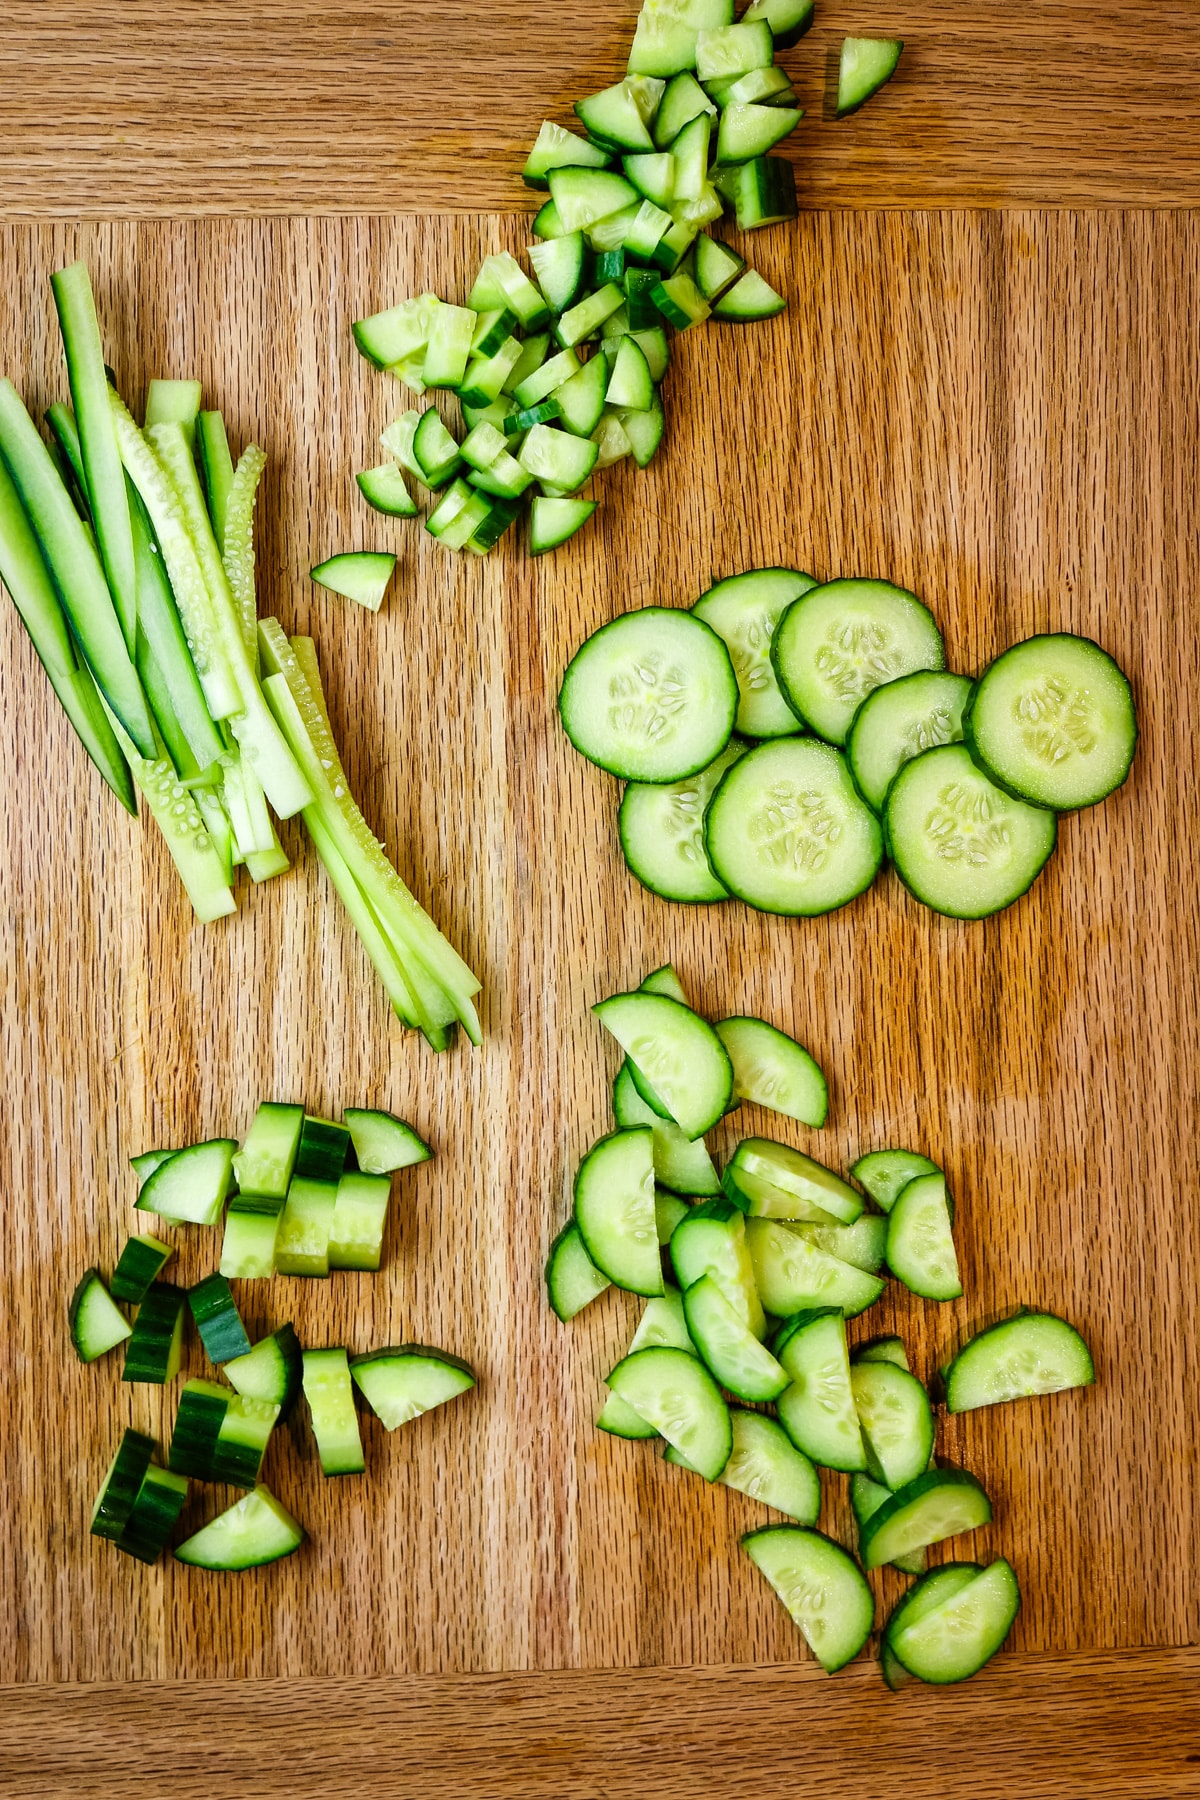 cucumber cut into various shapes and sizes on a wooden cutting board.